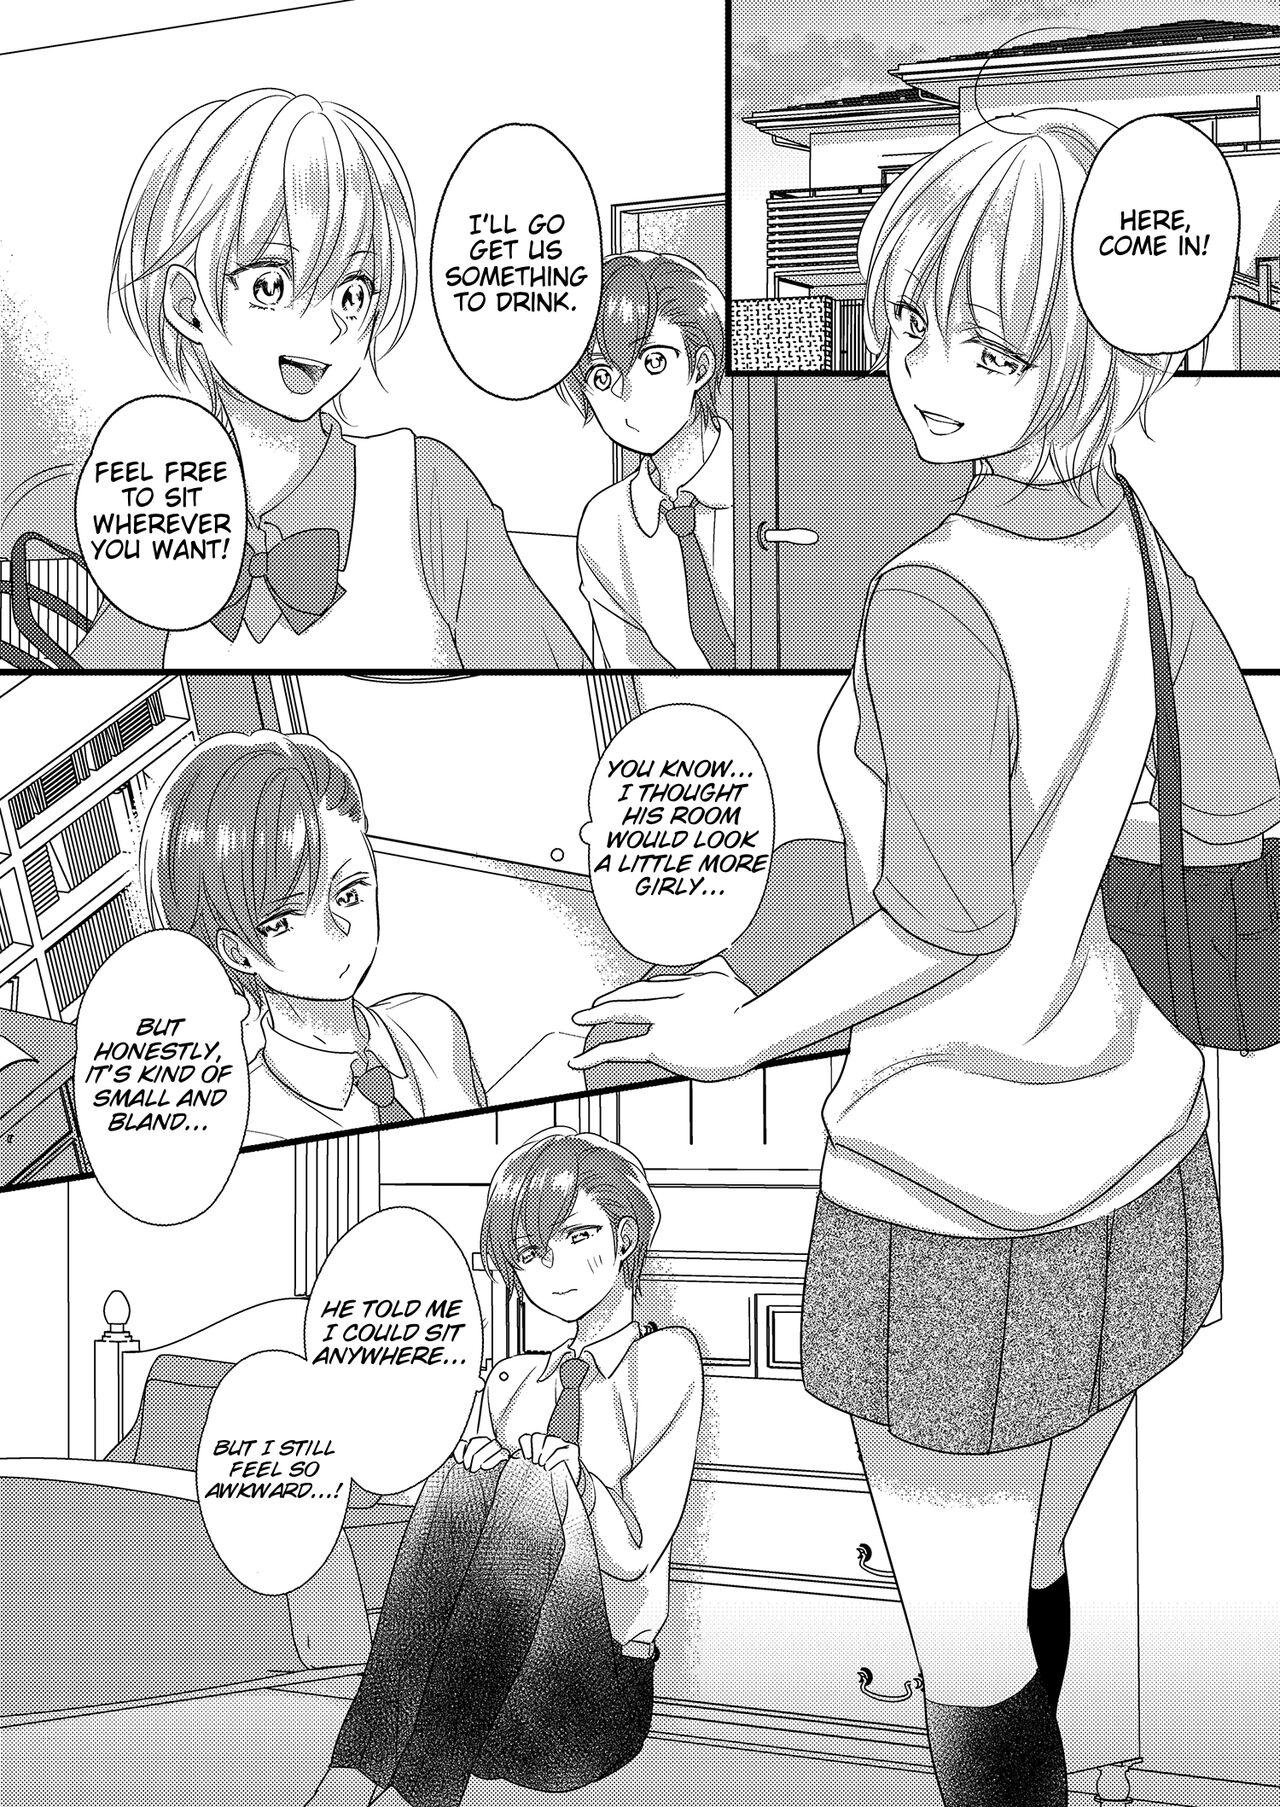 Perverted Haru and Sana ～Love Connected Through Cosplay～ - Original Culo - Page 9